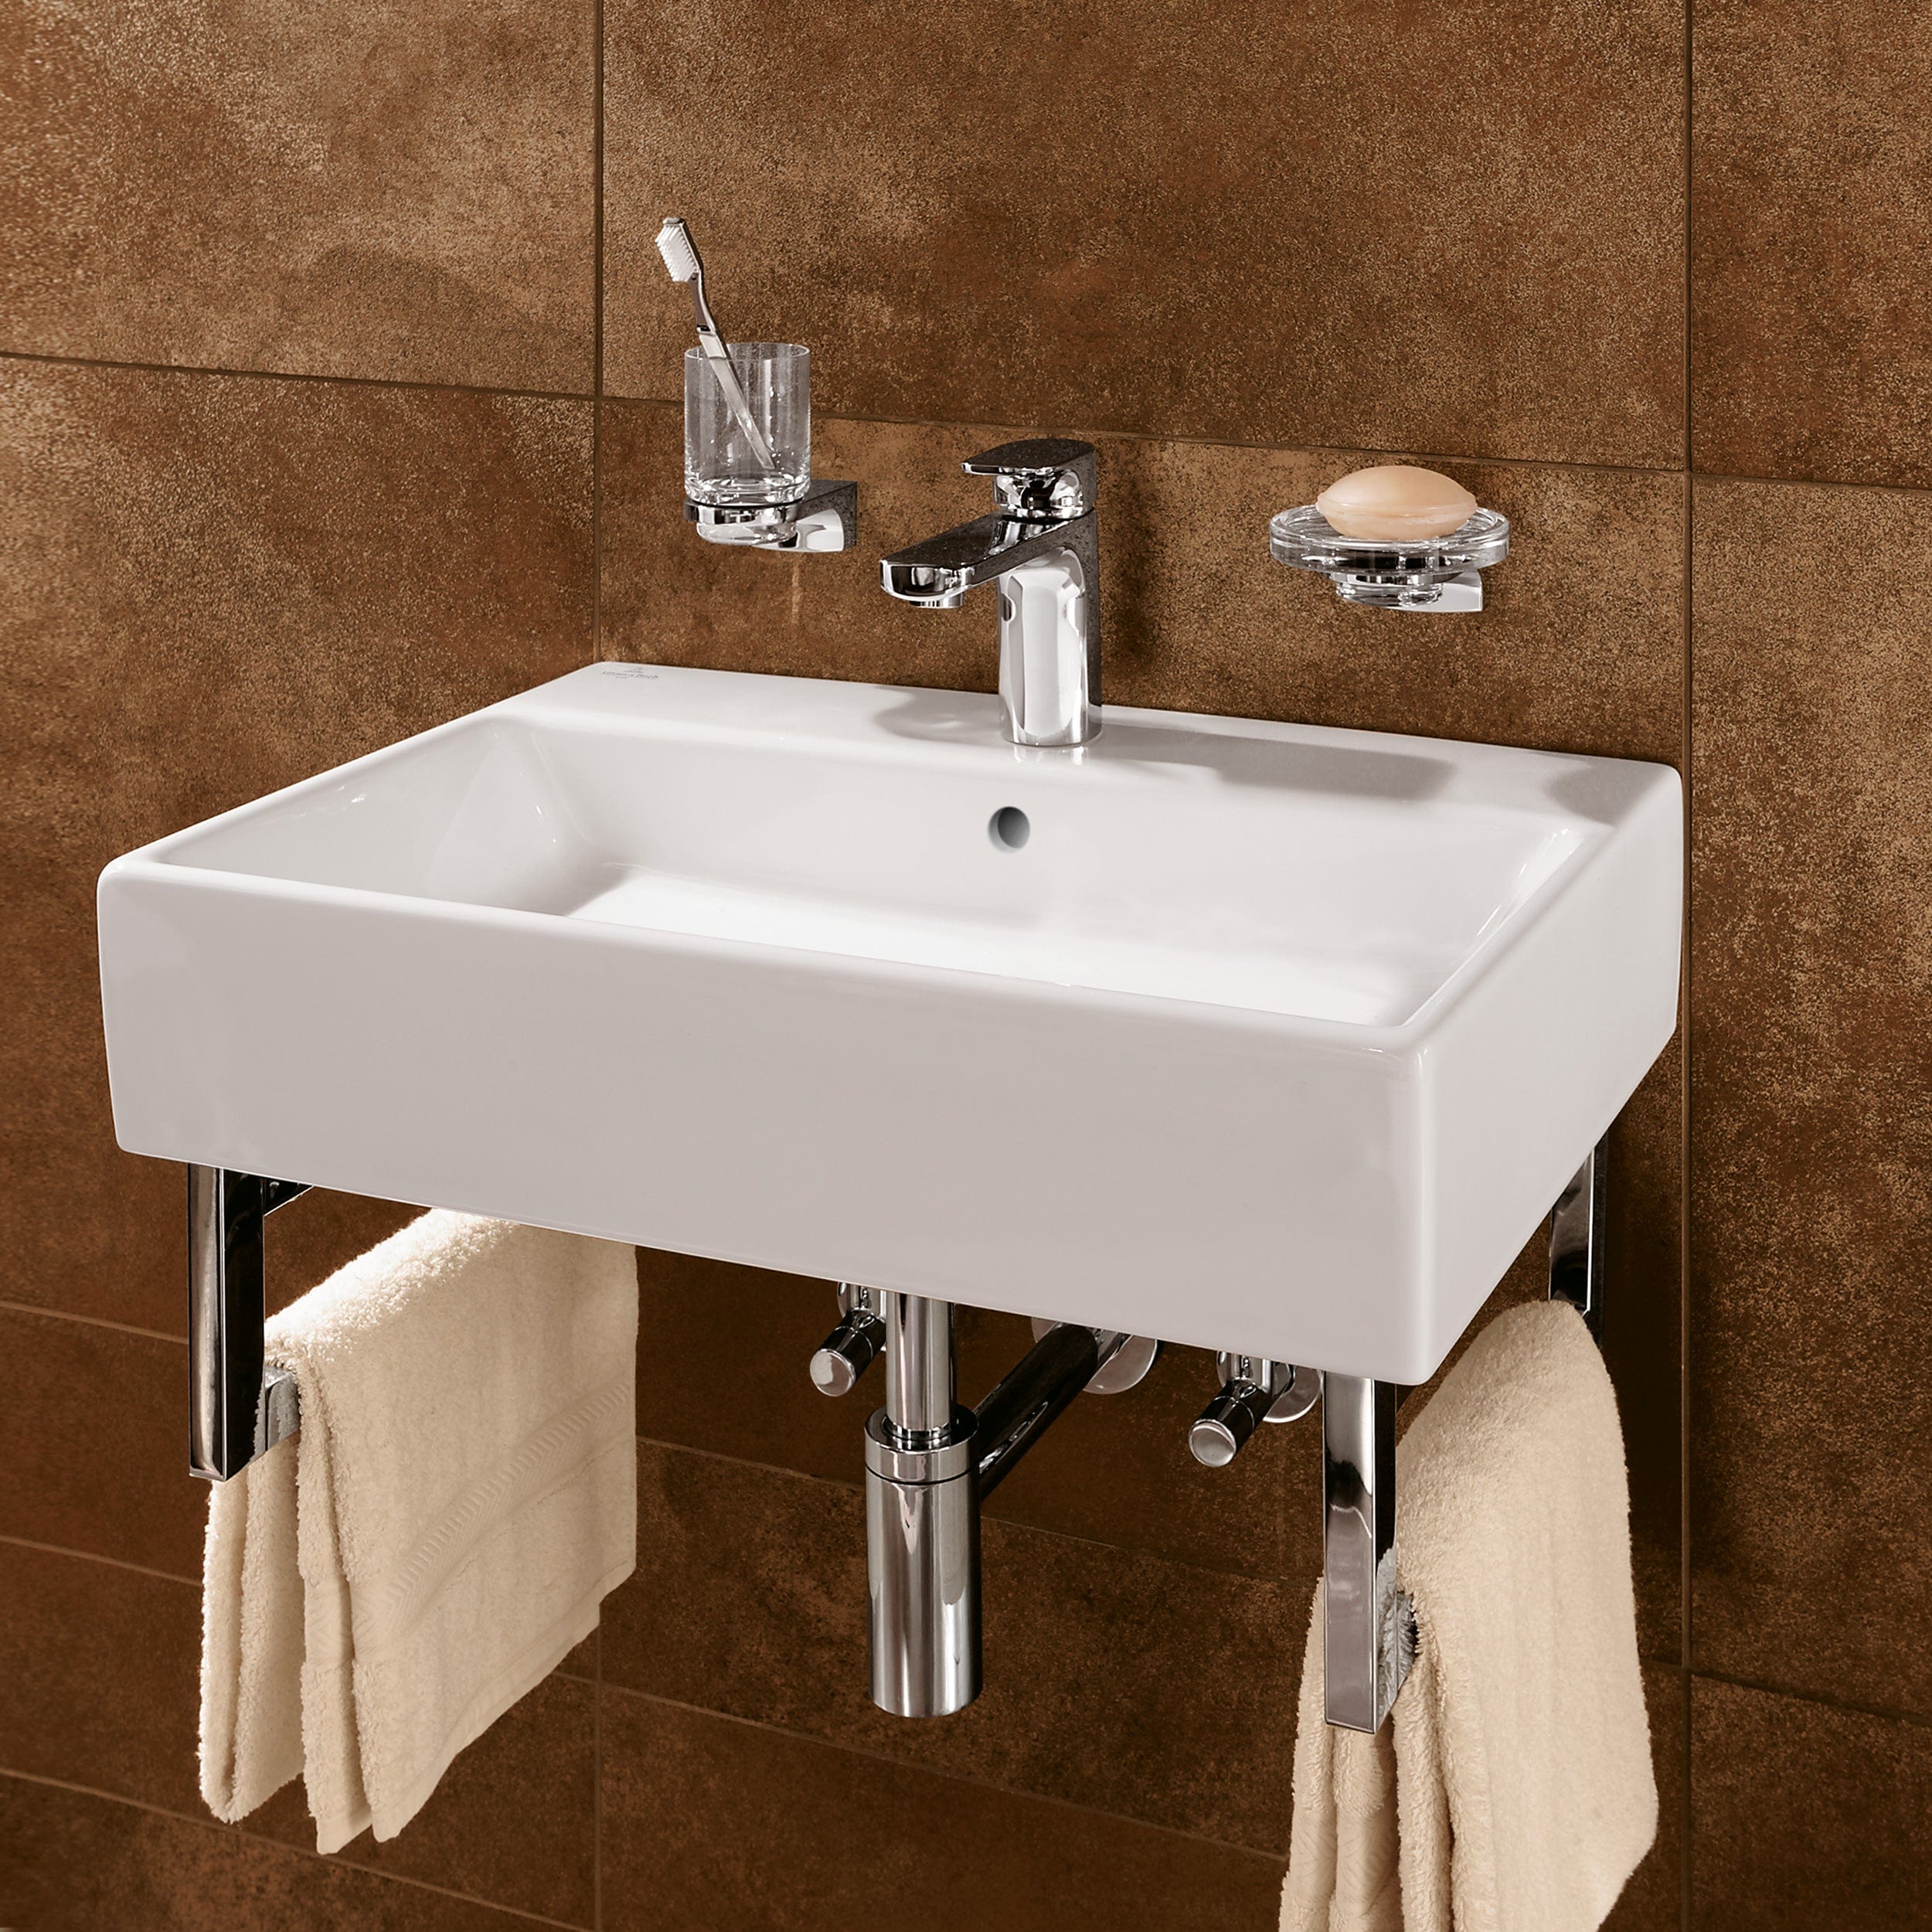 Villeroy & Boch Memento 500 x 420mm Washbasin White, With Ceramicplus, With 1 Tap Hole, Ungrounded | Supply Master | Accra, Ghana Bathroom Sink Buy Tools hardware Building materials